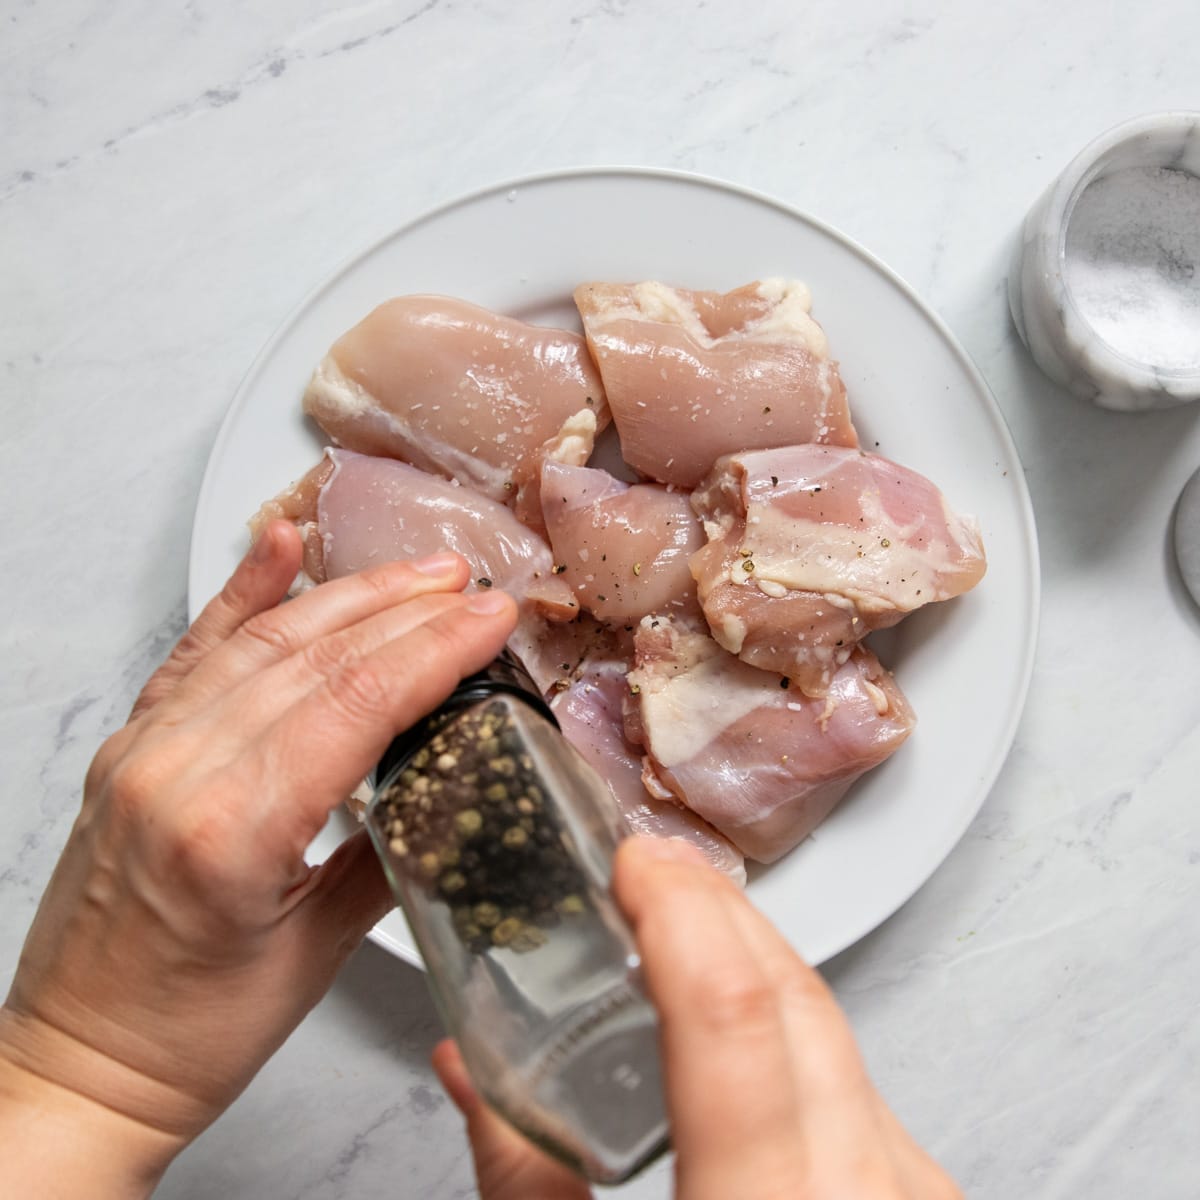 Hands are grinding a glass black pepper mill over a plate of boneless, skinless chicken thighs.